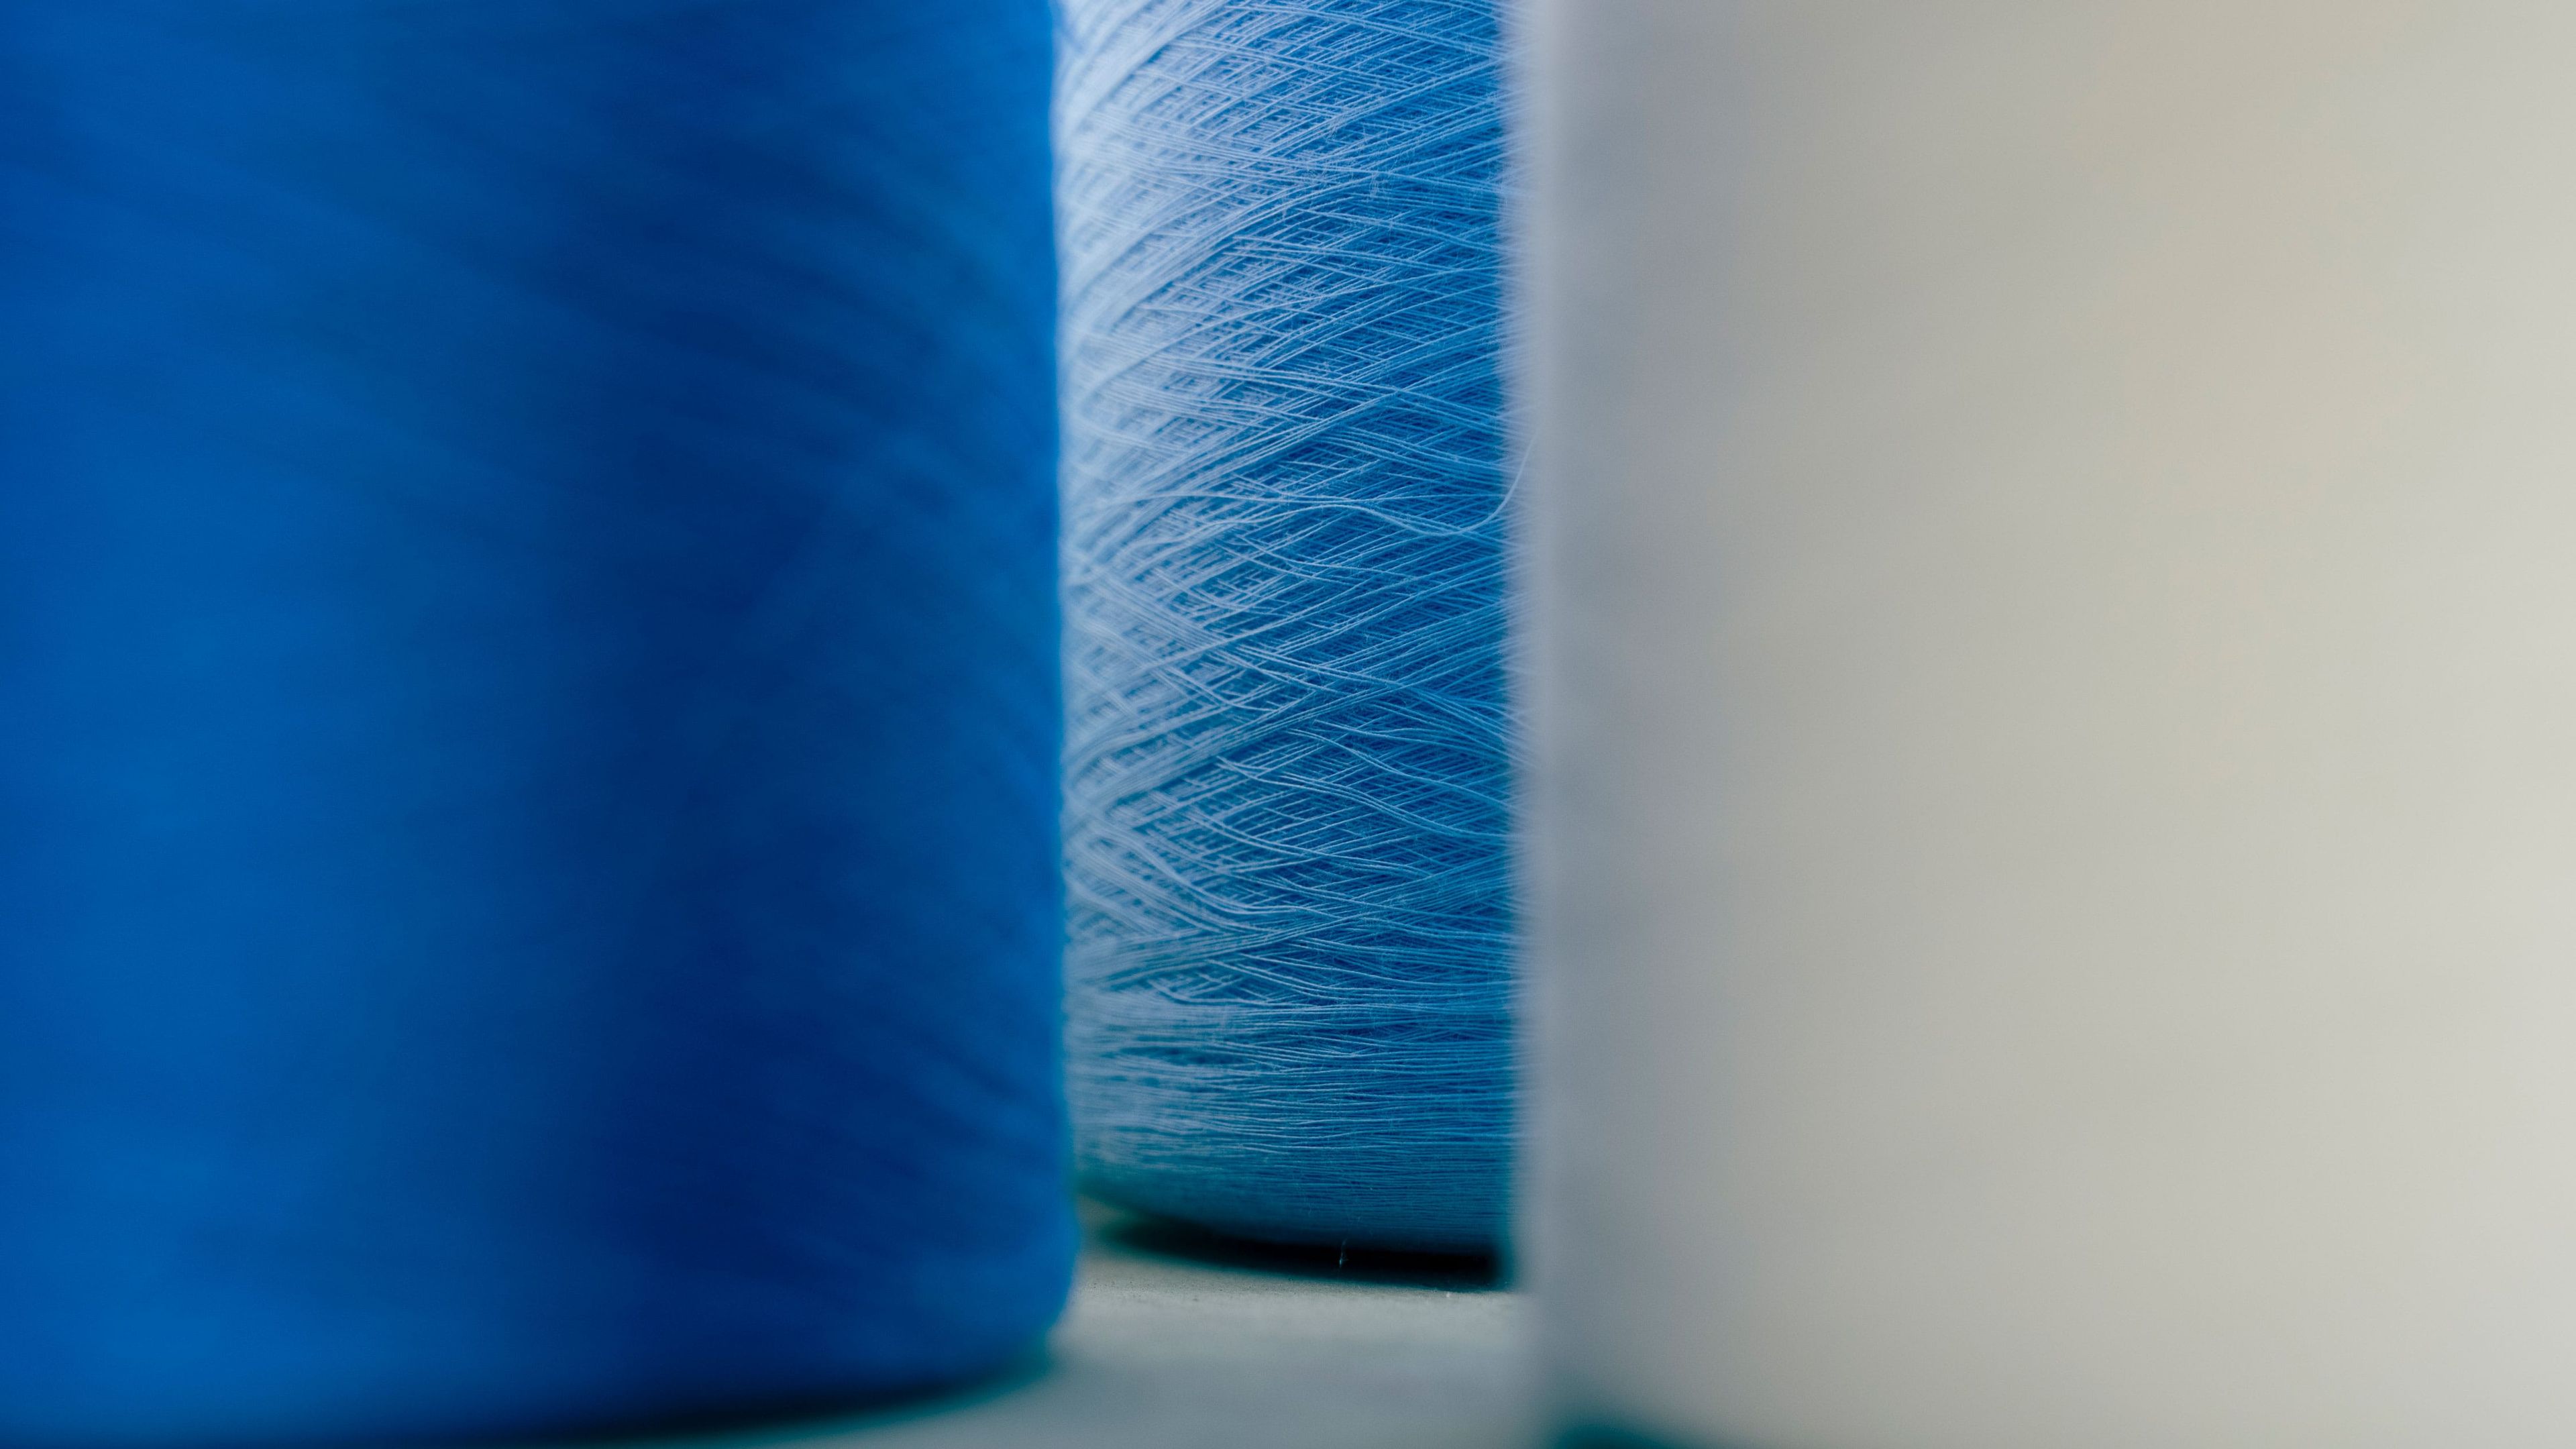 Otto Textil - Experience and expertise in yarns